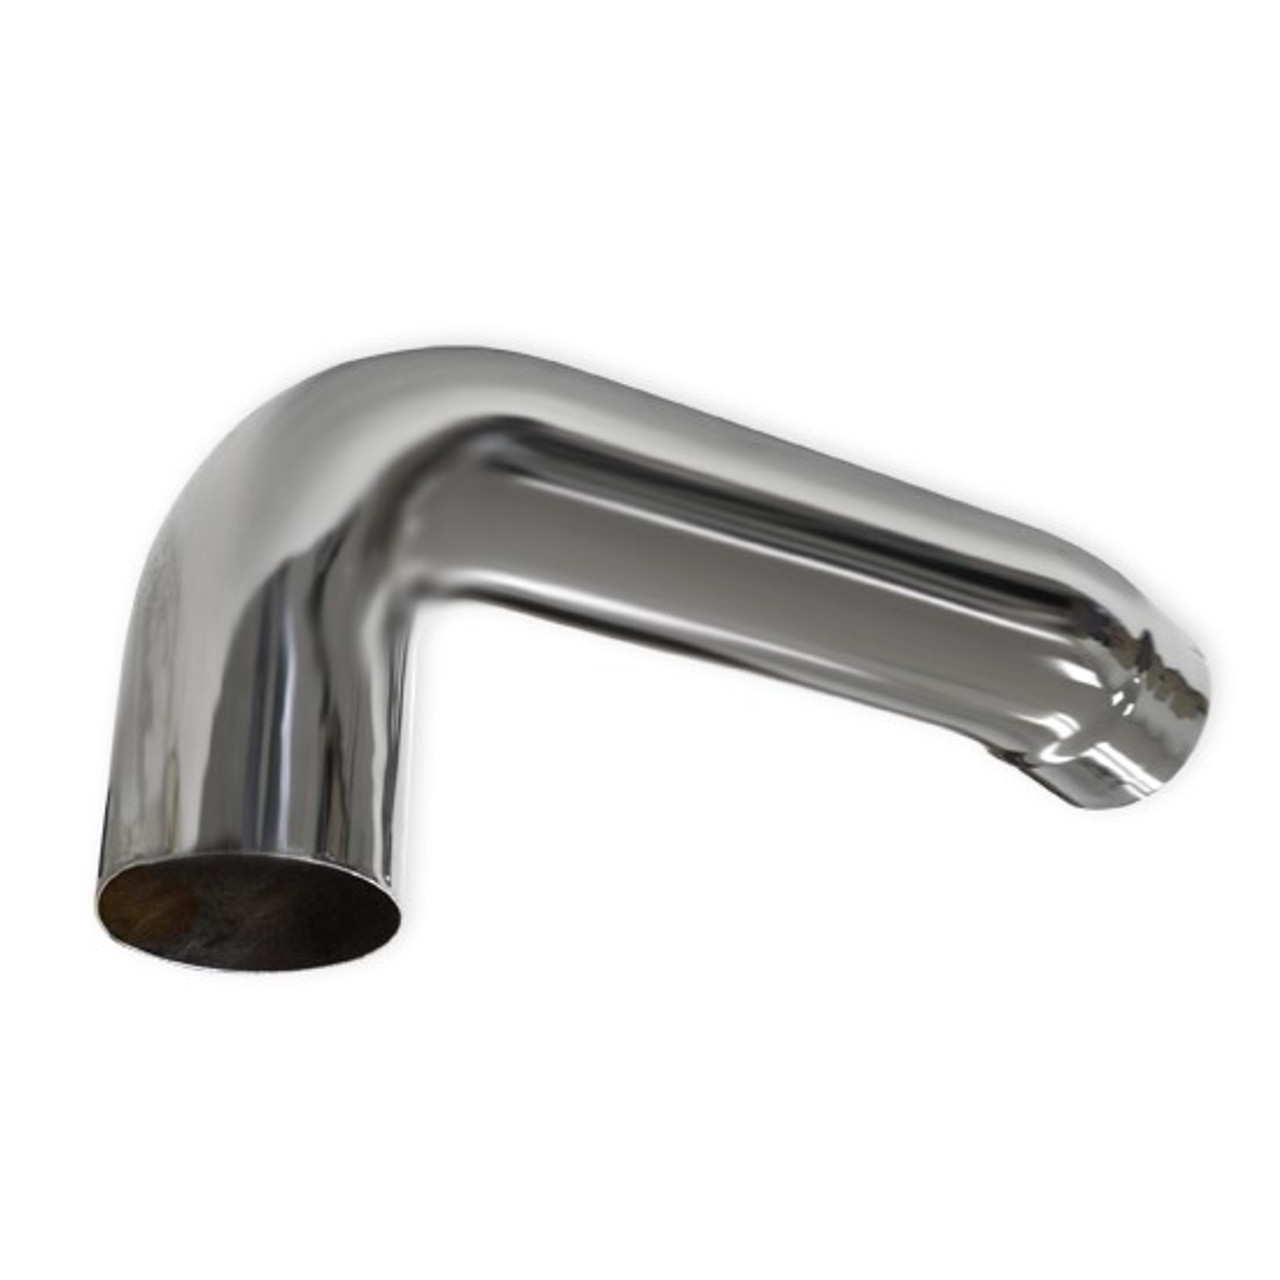 Exhaust panel tailpipe 100 mm N1-111 stainless steel beveled 55 mm  connection